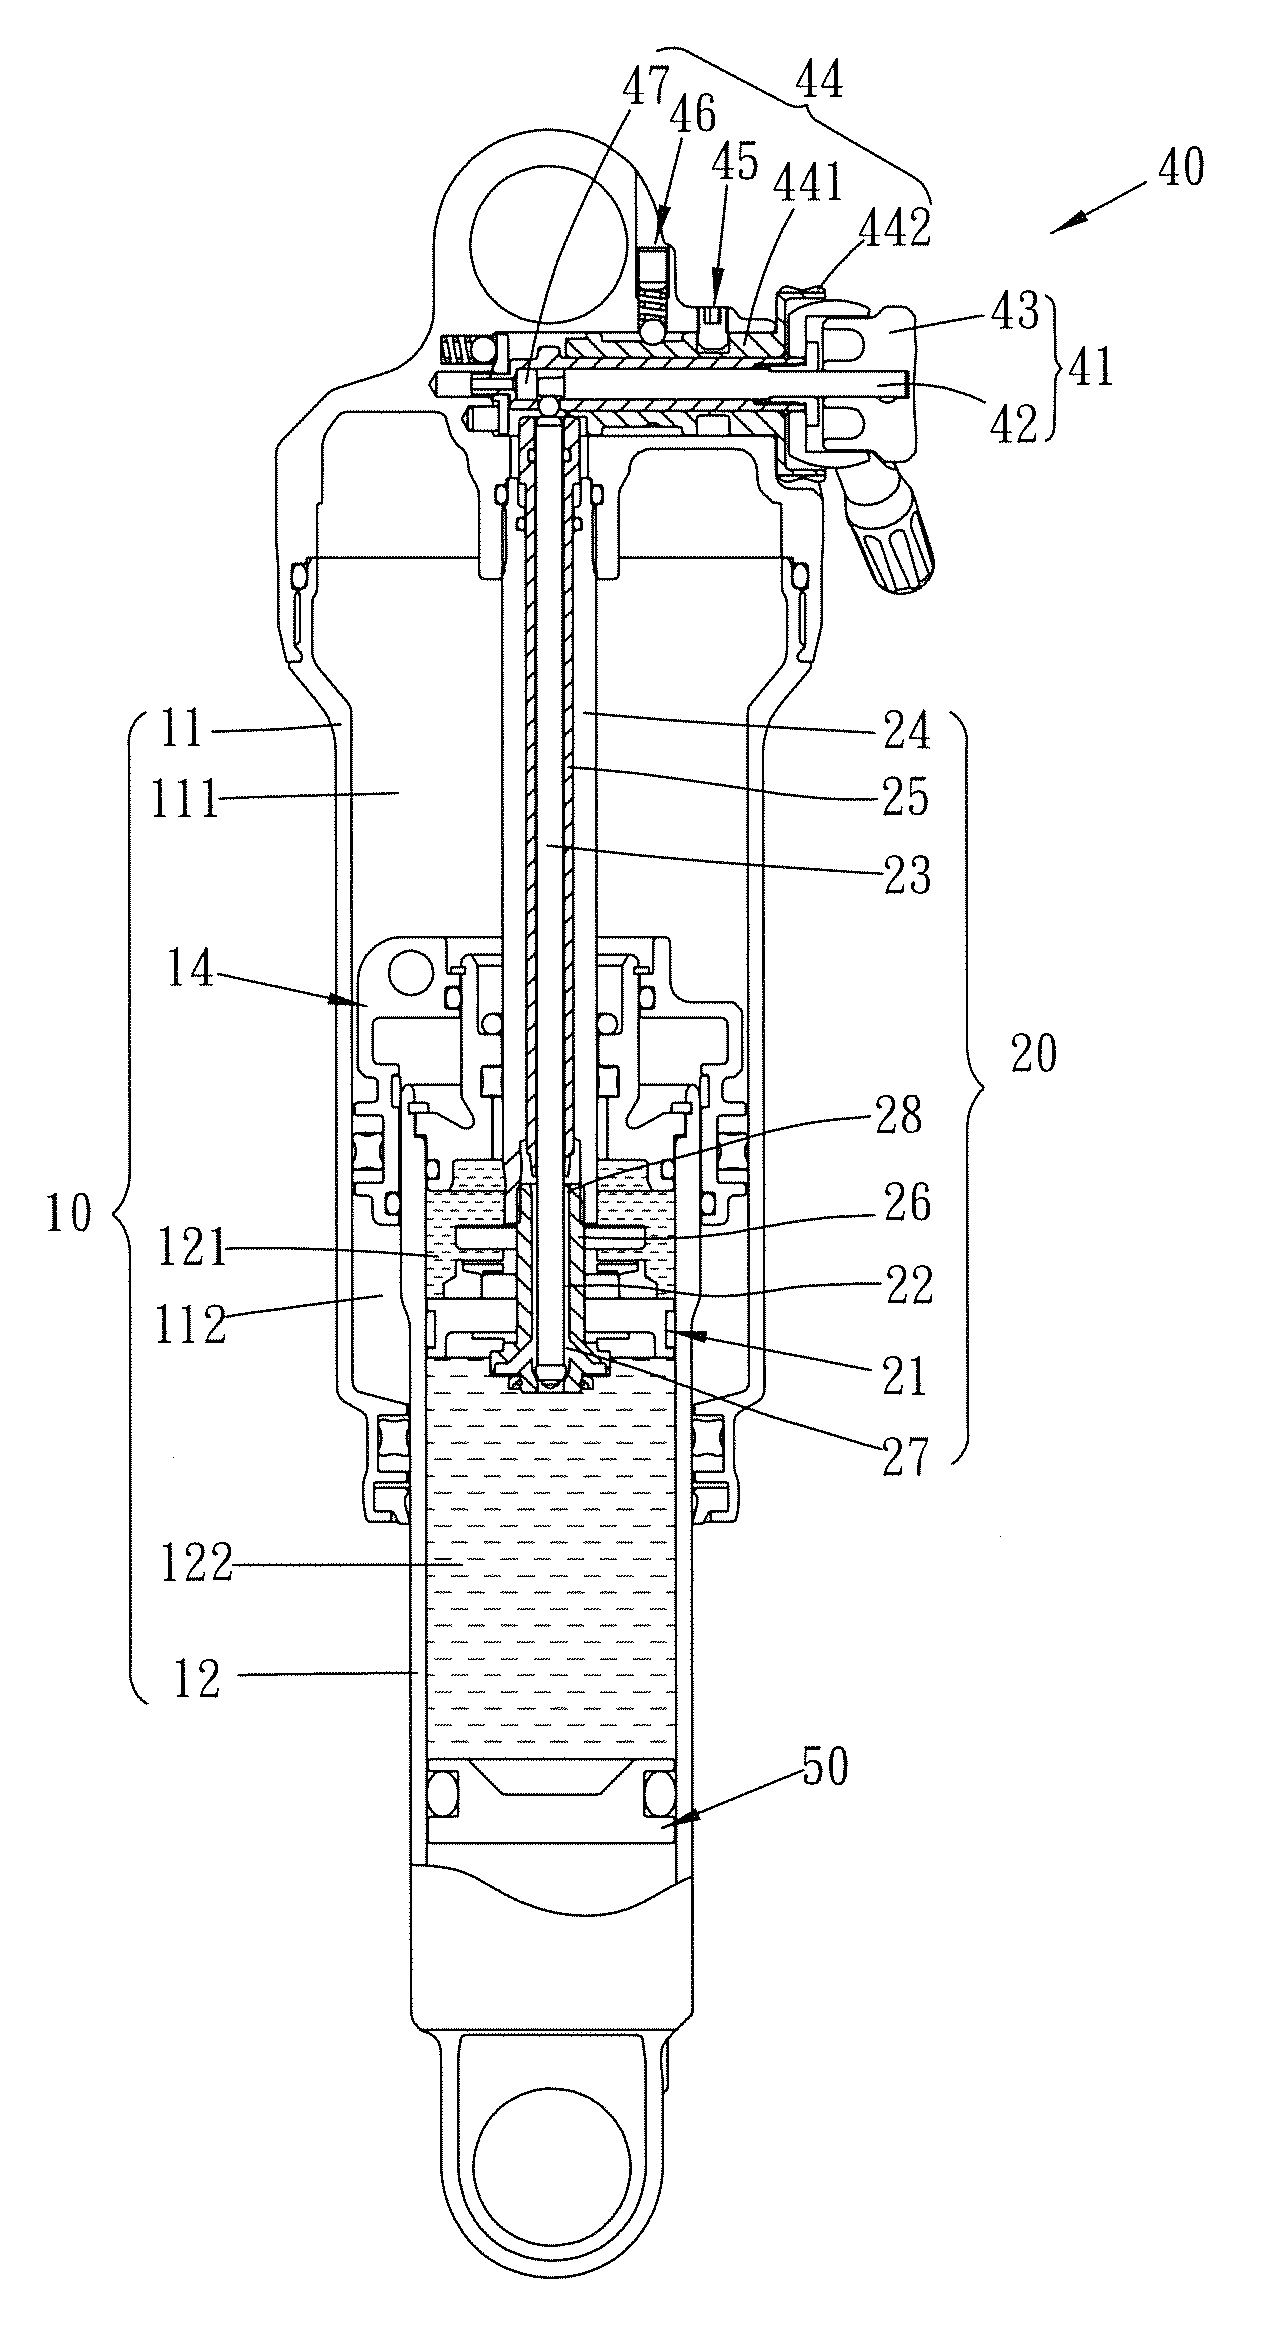 Co-axial adjustable damping assembly